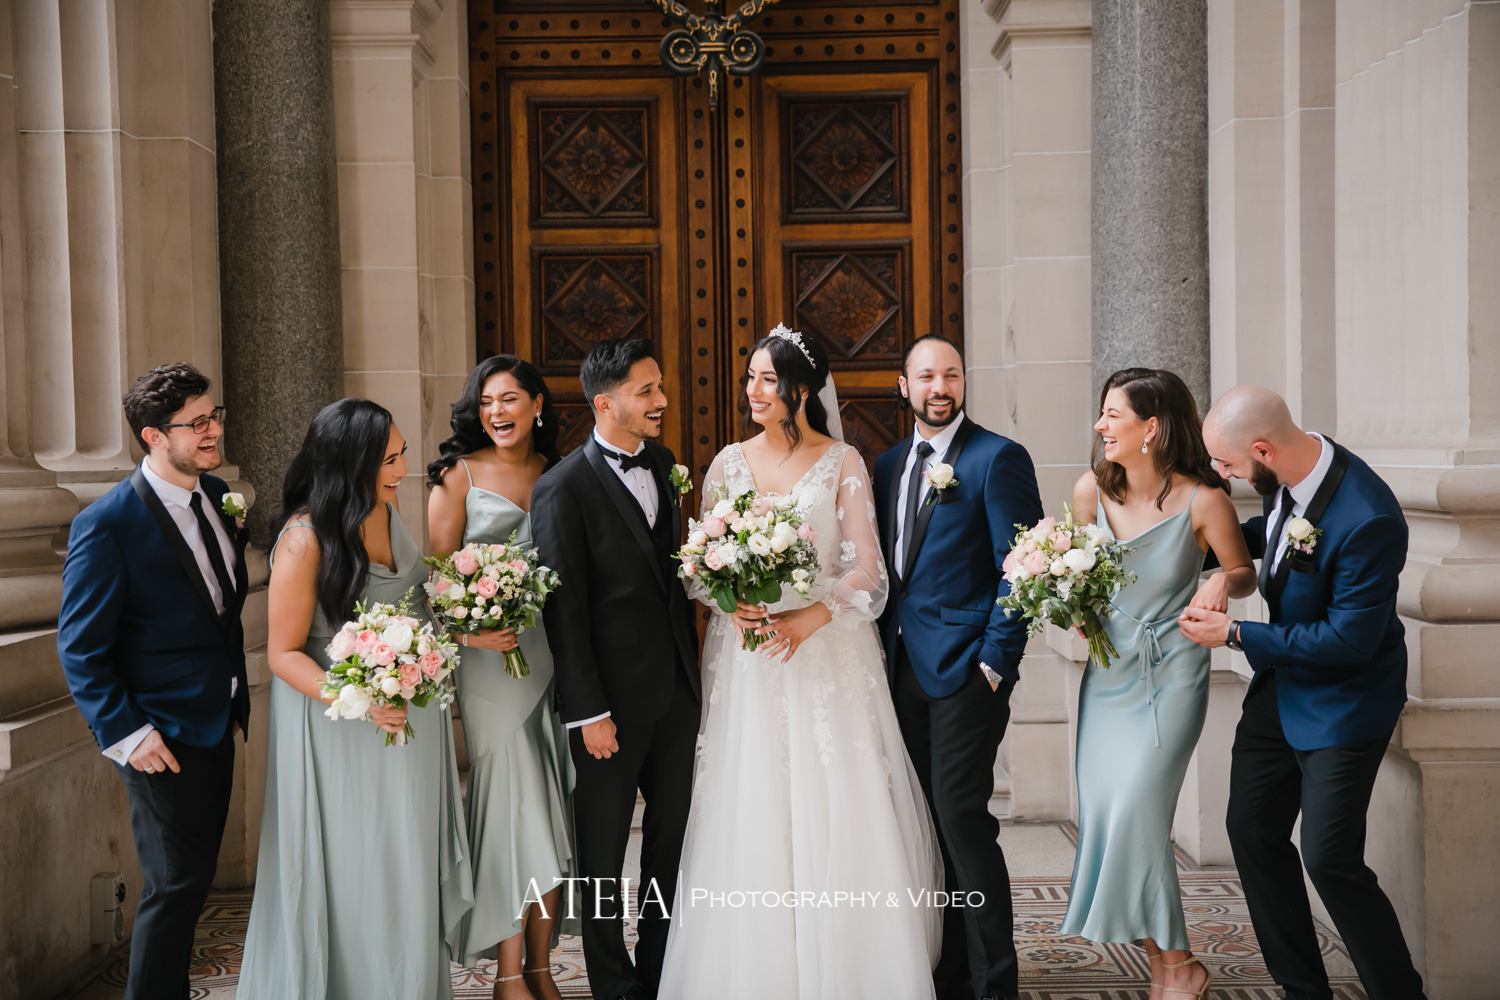 , Melbourne Wedding Photography by ATEIA Photography &#038; Video